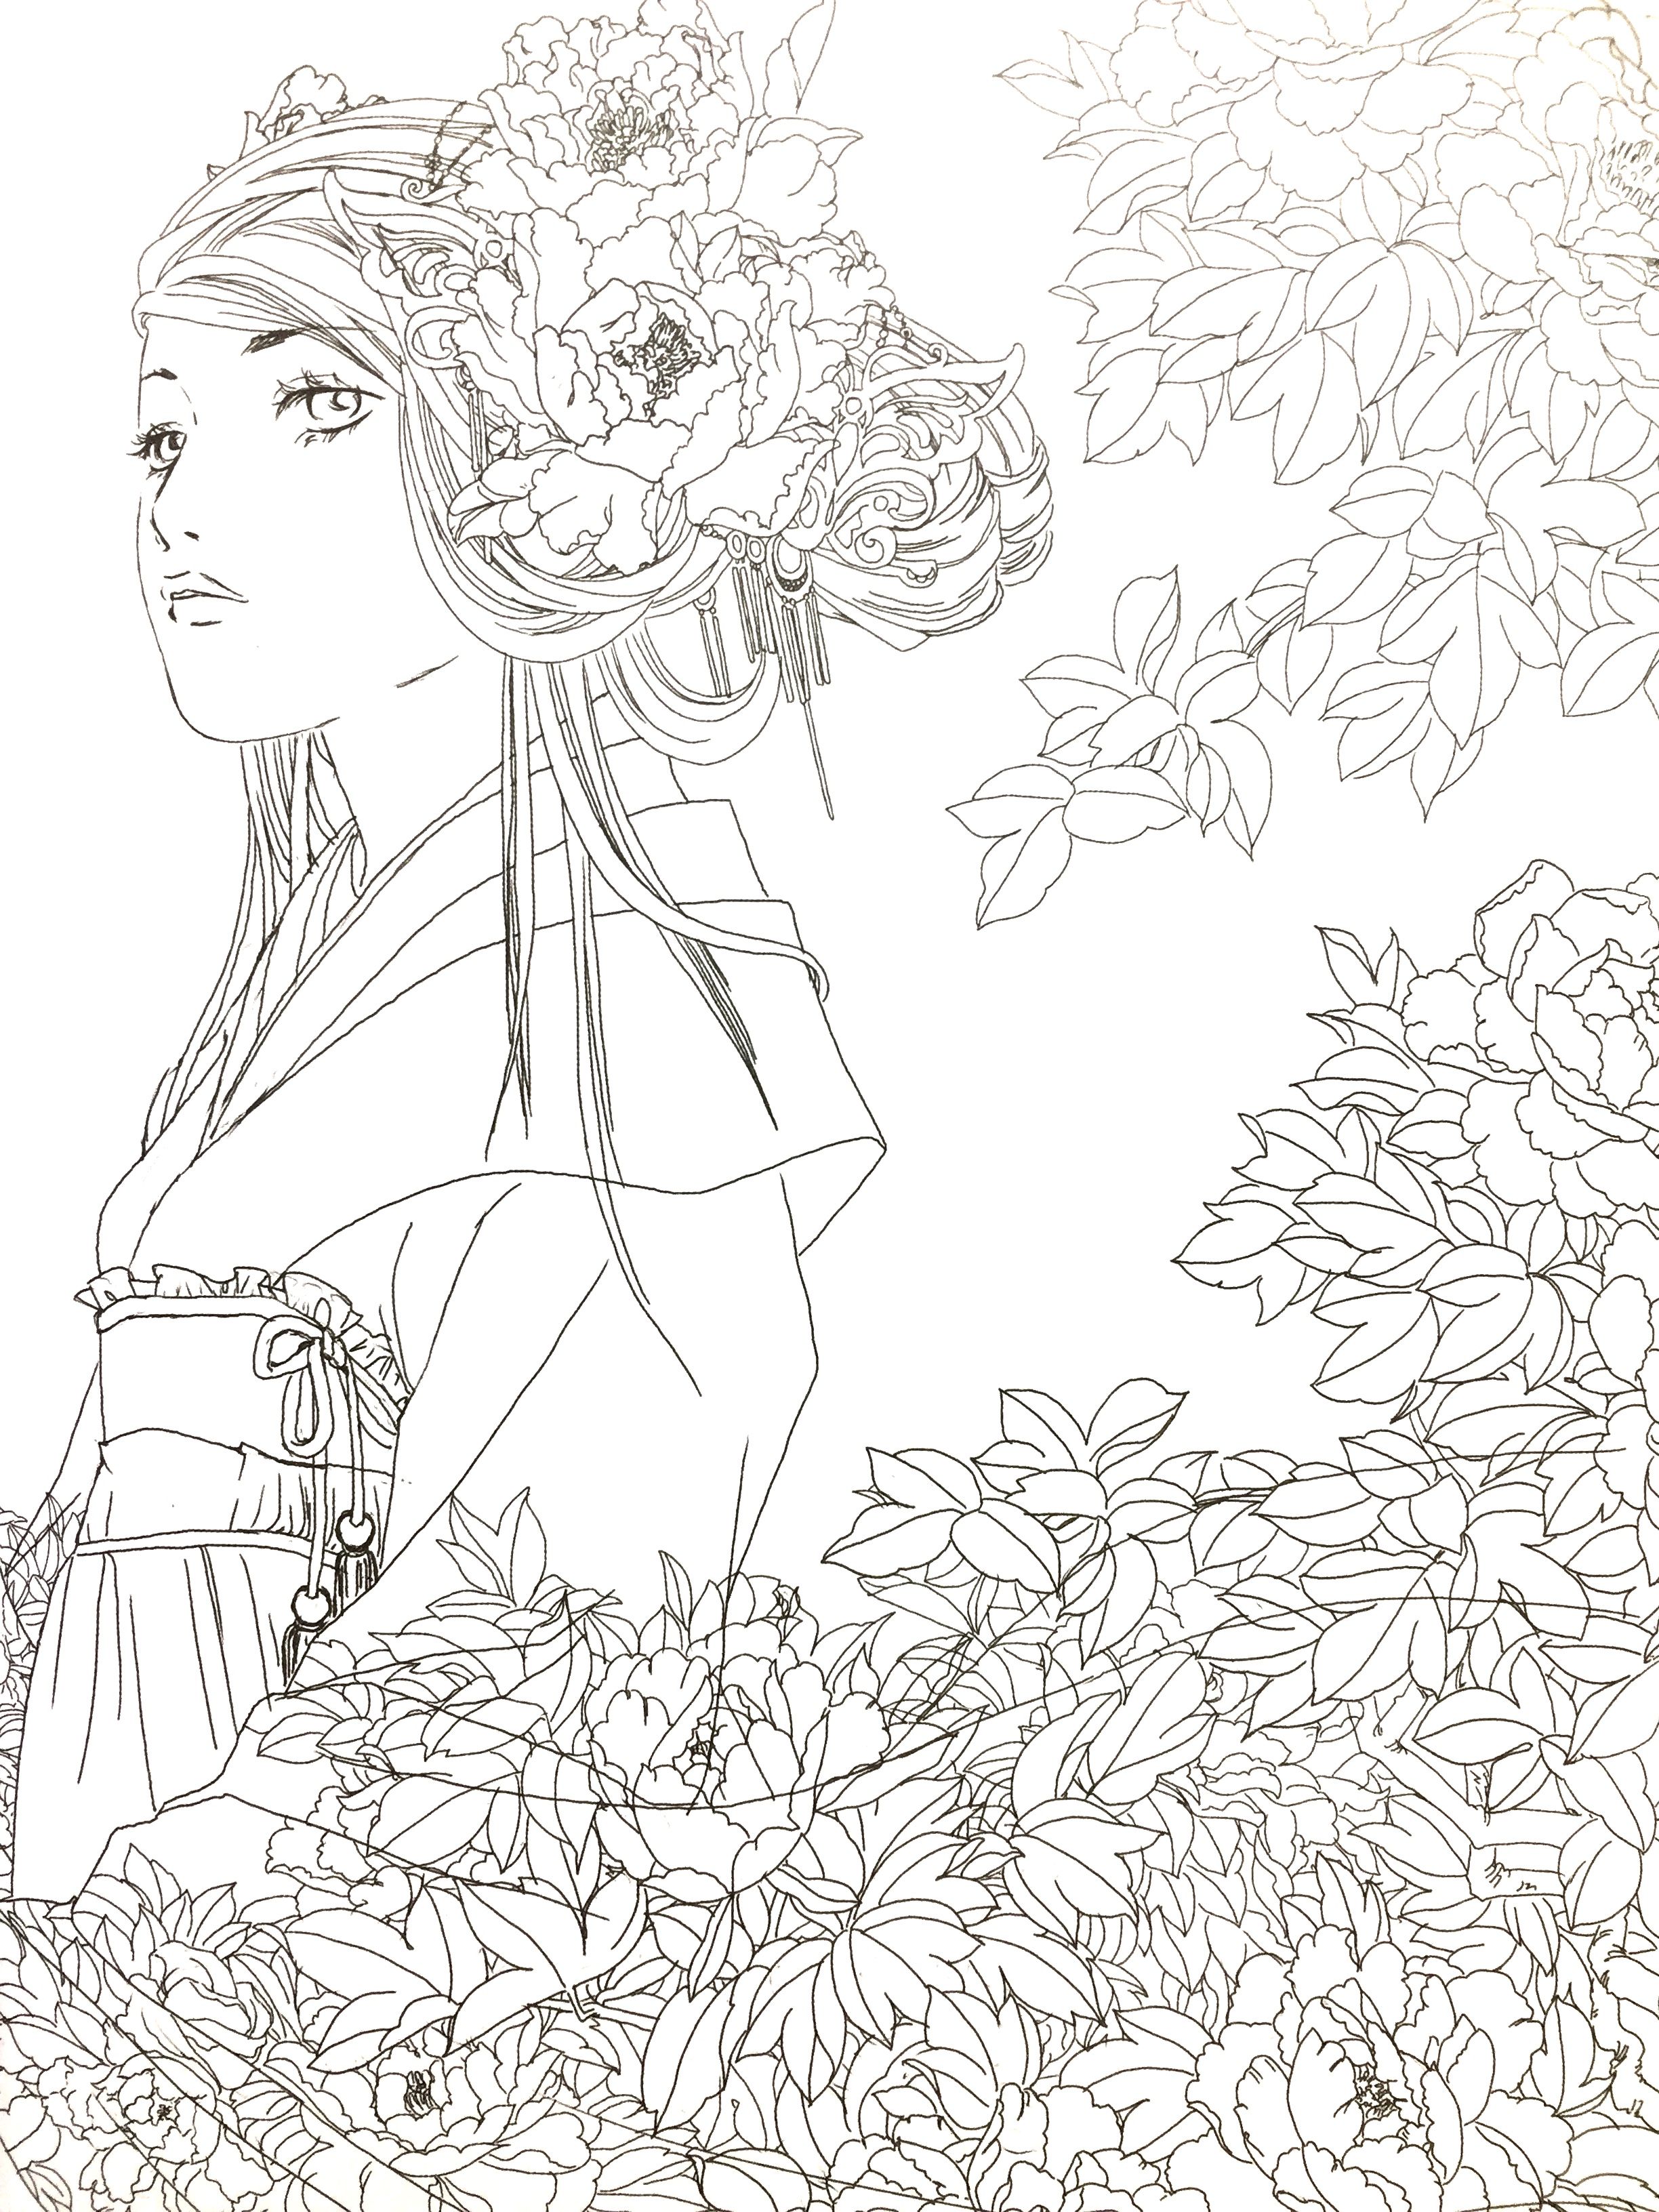 Adult Coloring - Chinese - Asian | Cute coloring pages, Coloring ...